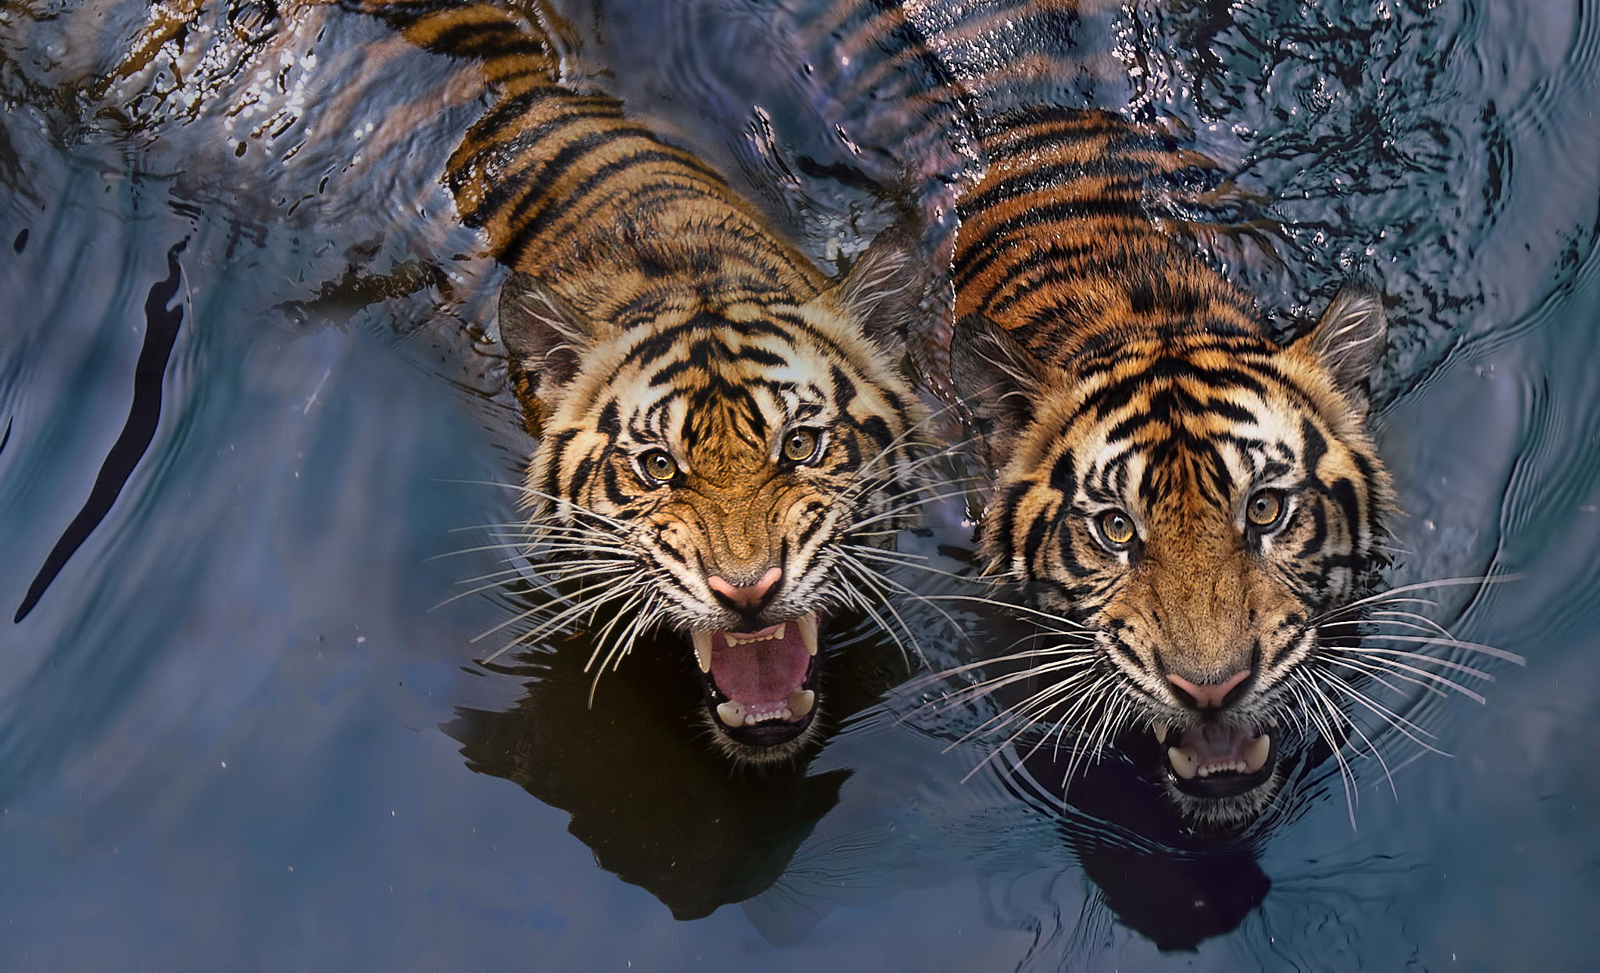 Tiger Photography | 30+ Tigers Photos That Will Leave You Spellbound